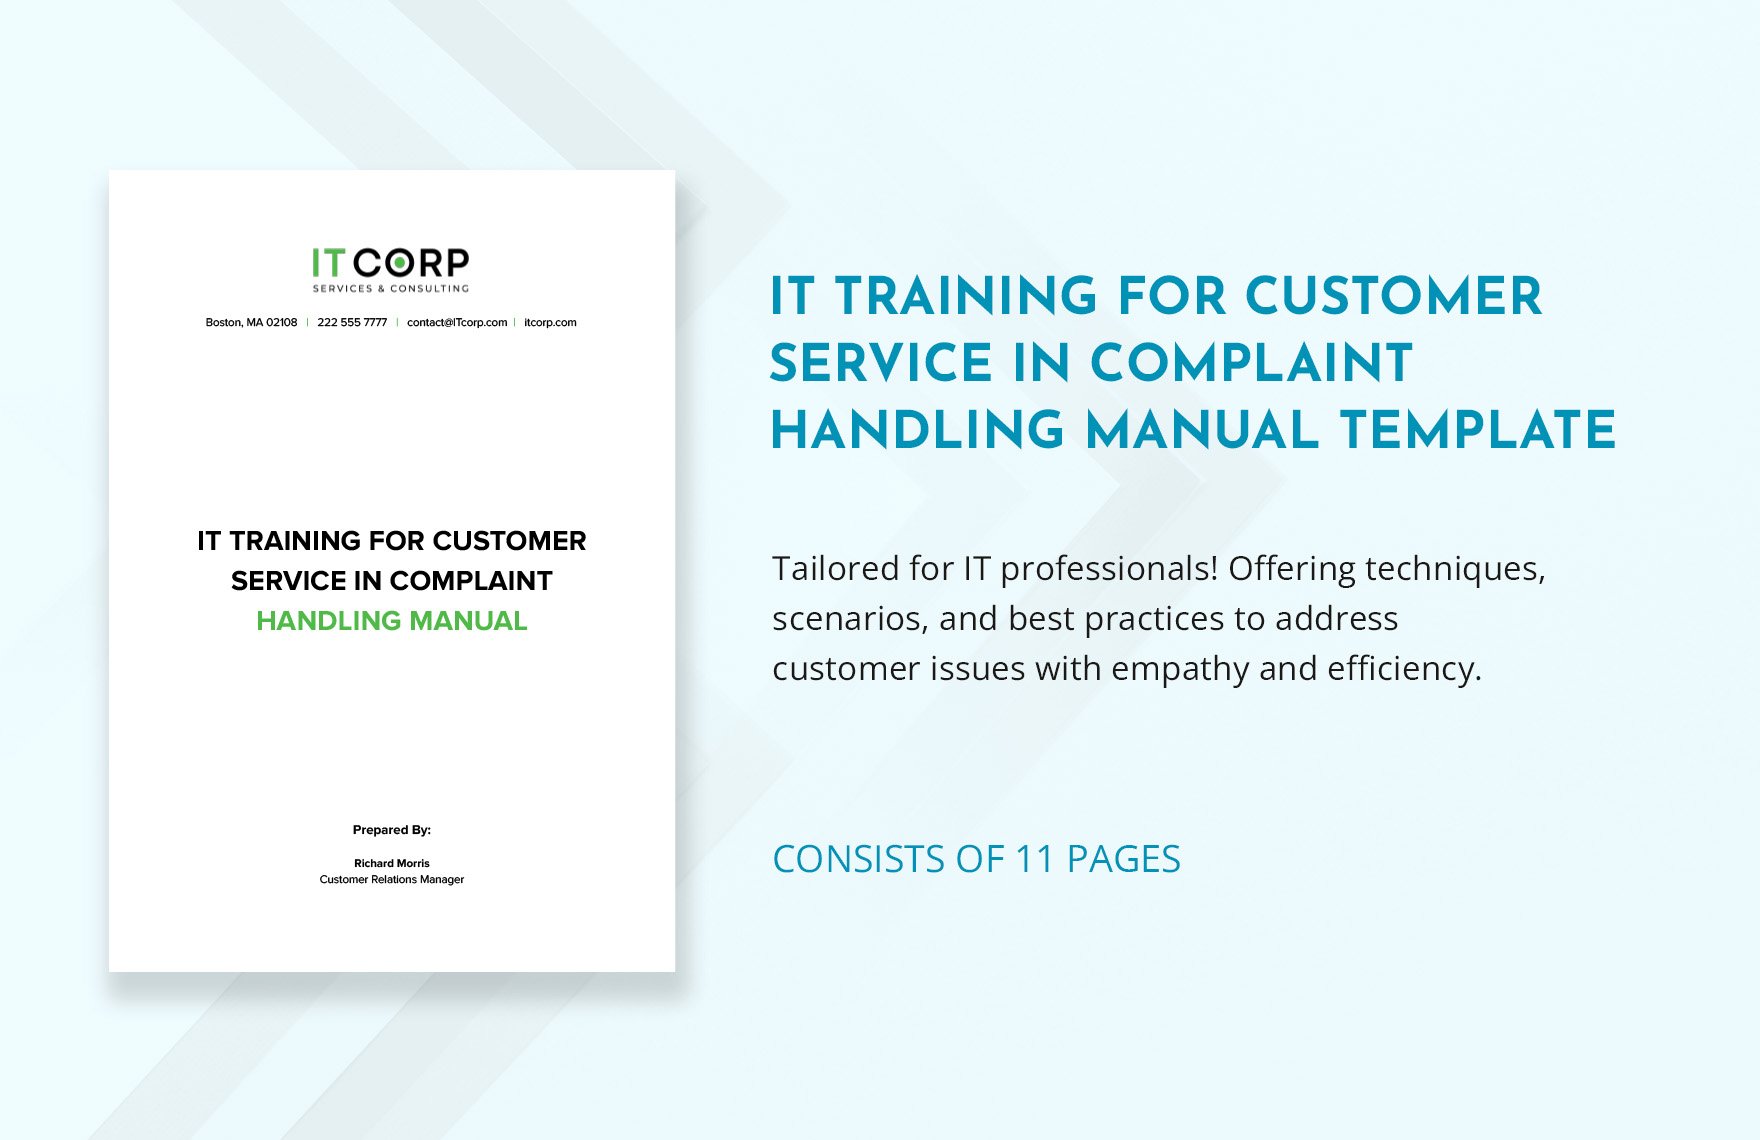 IT Training for Customer Service in Complaint Handling Manual Template